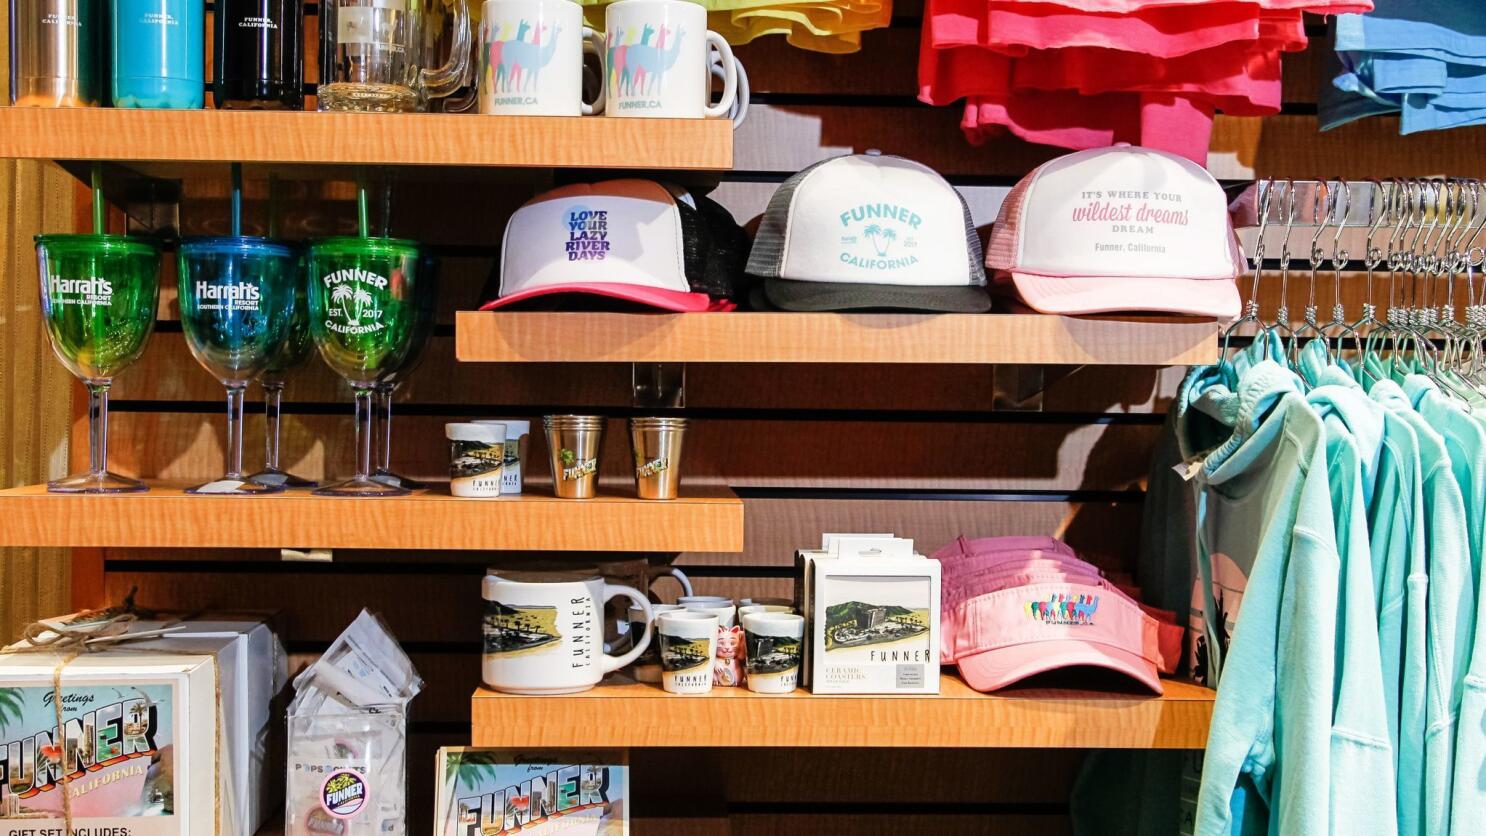 What to give your favorite casino-goer? Get lucky at the gift shop